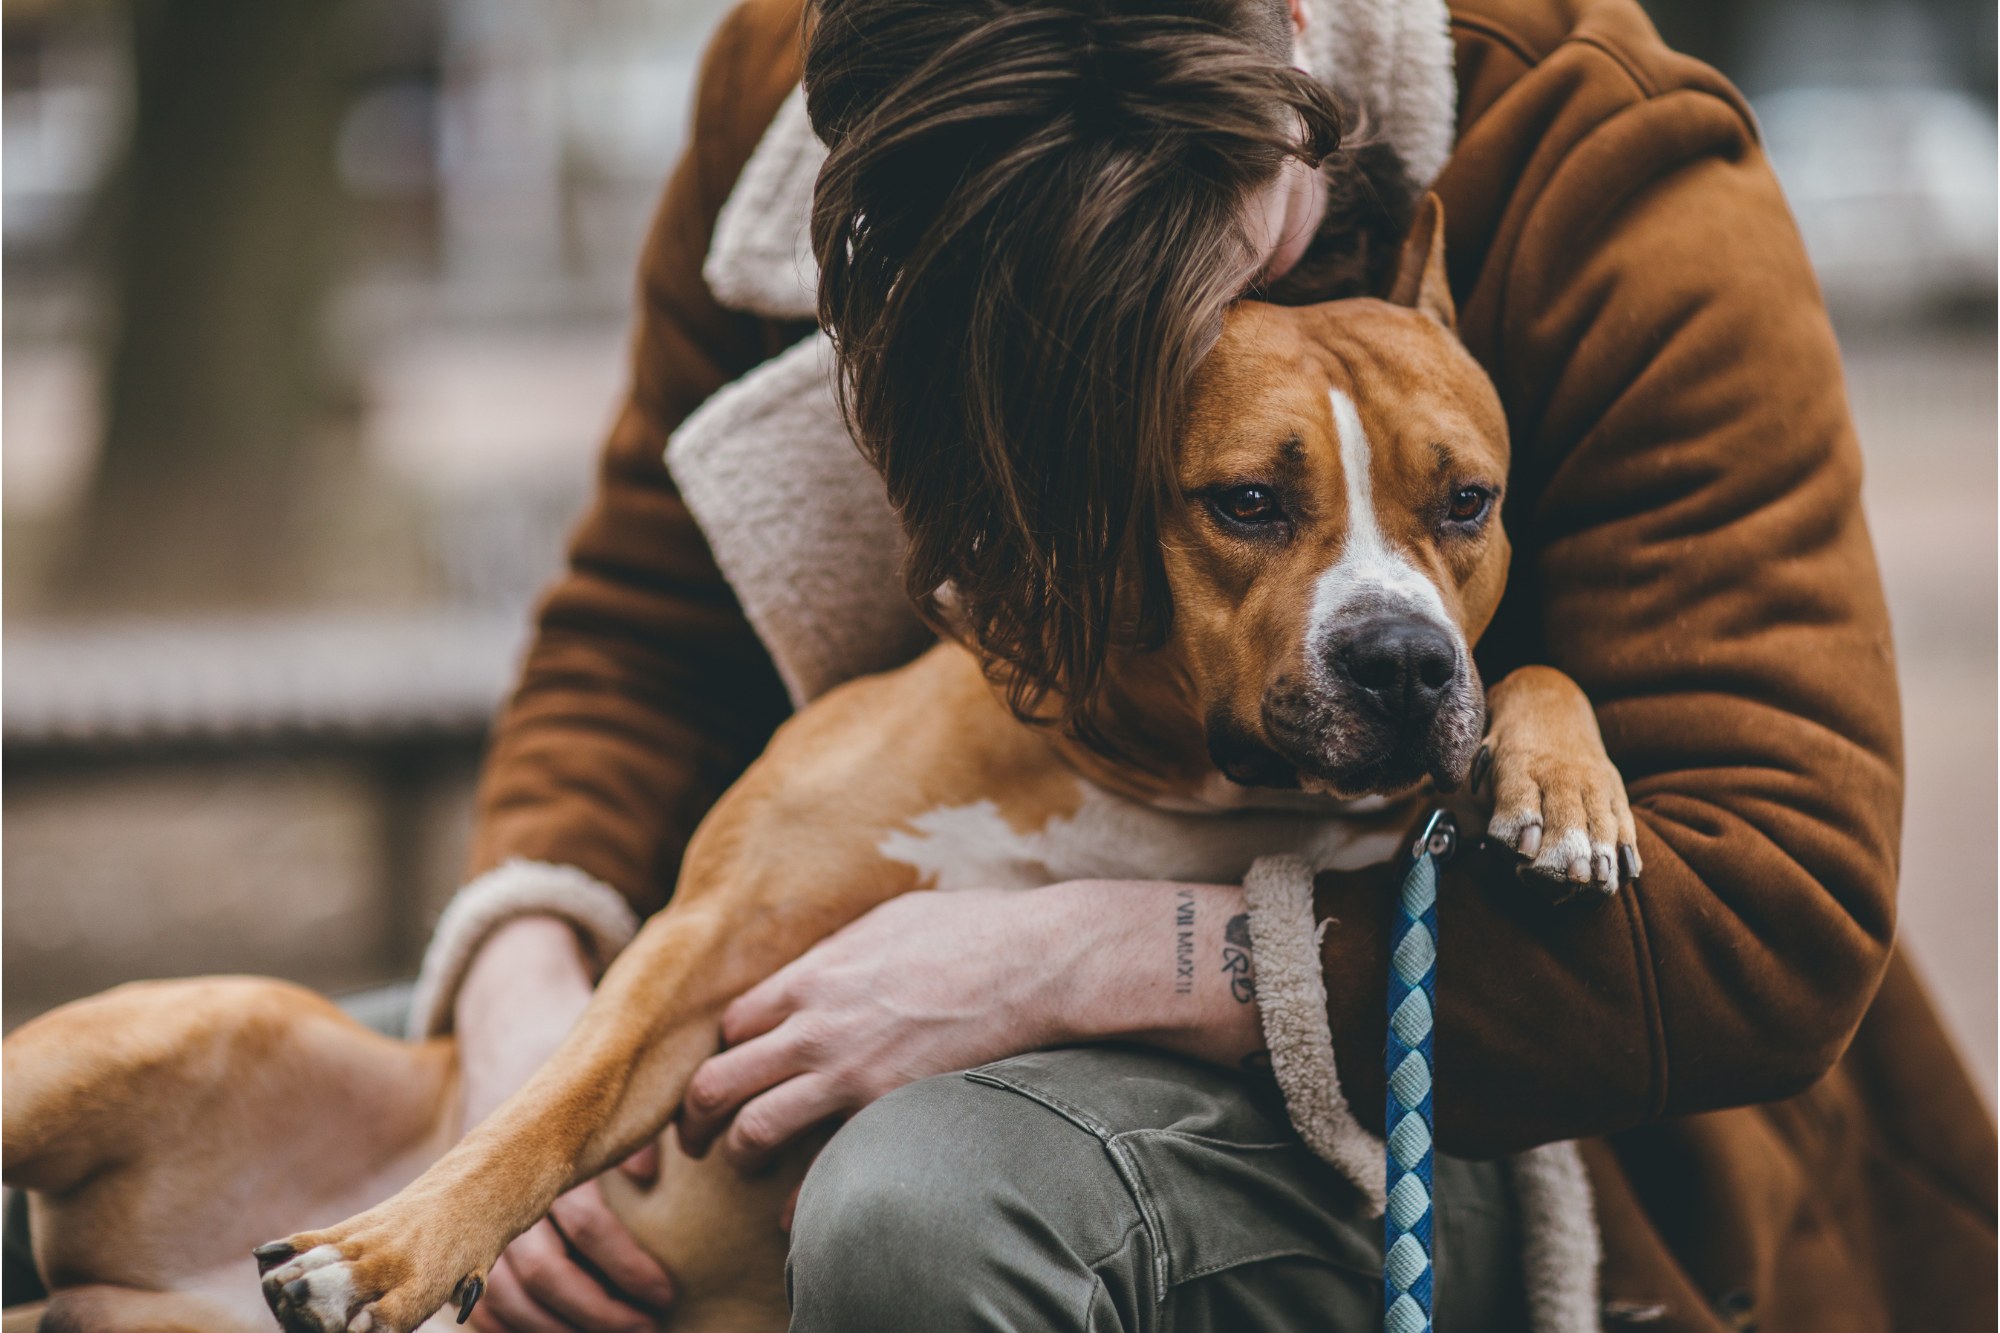 Act Now: Support Unhoused People and Pets